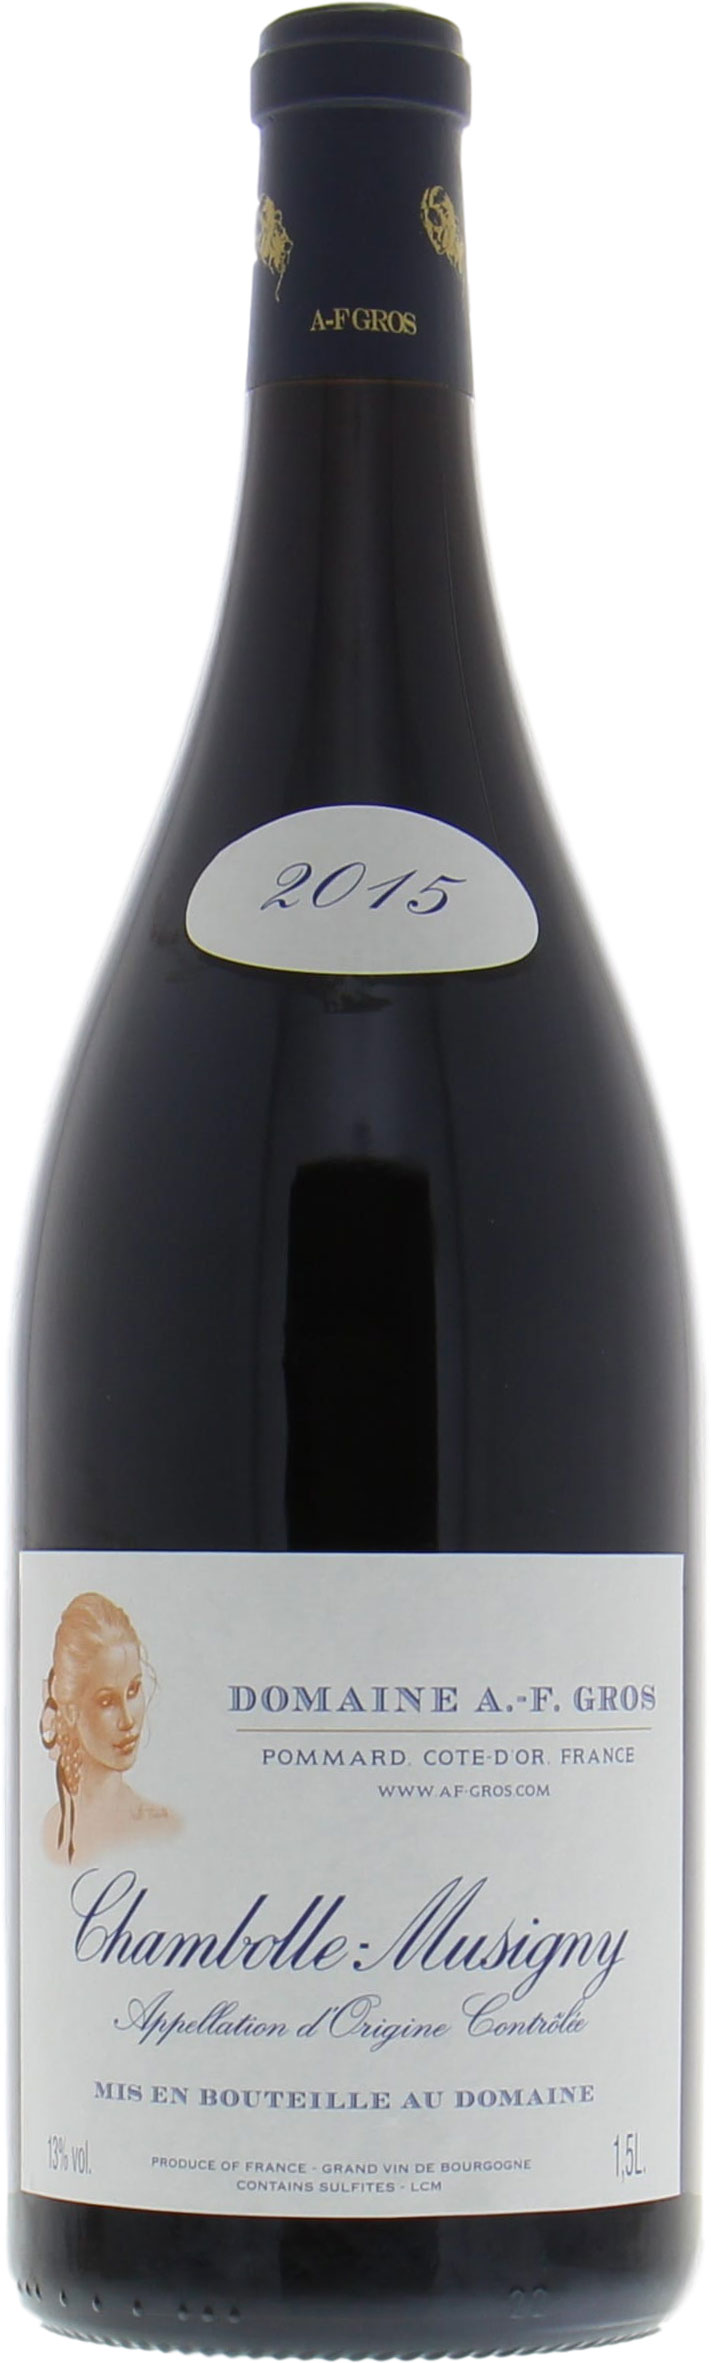 AF Gros - Chambolle Musigny 2015 Perfect